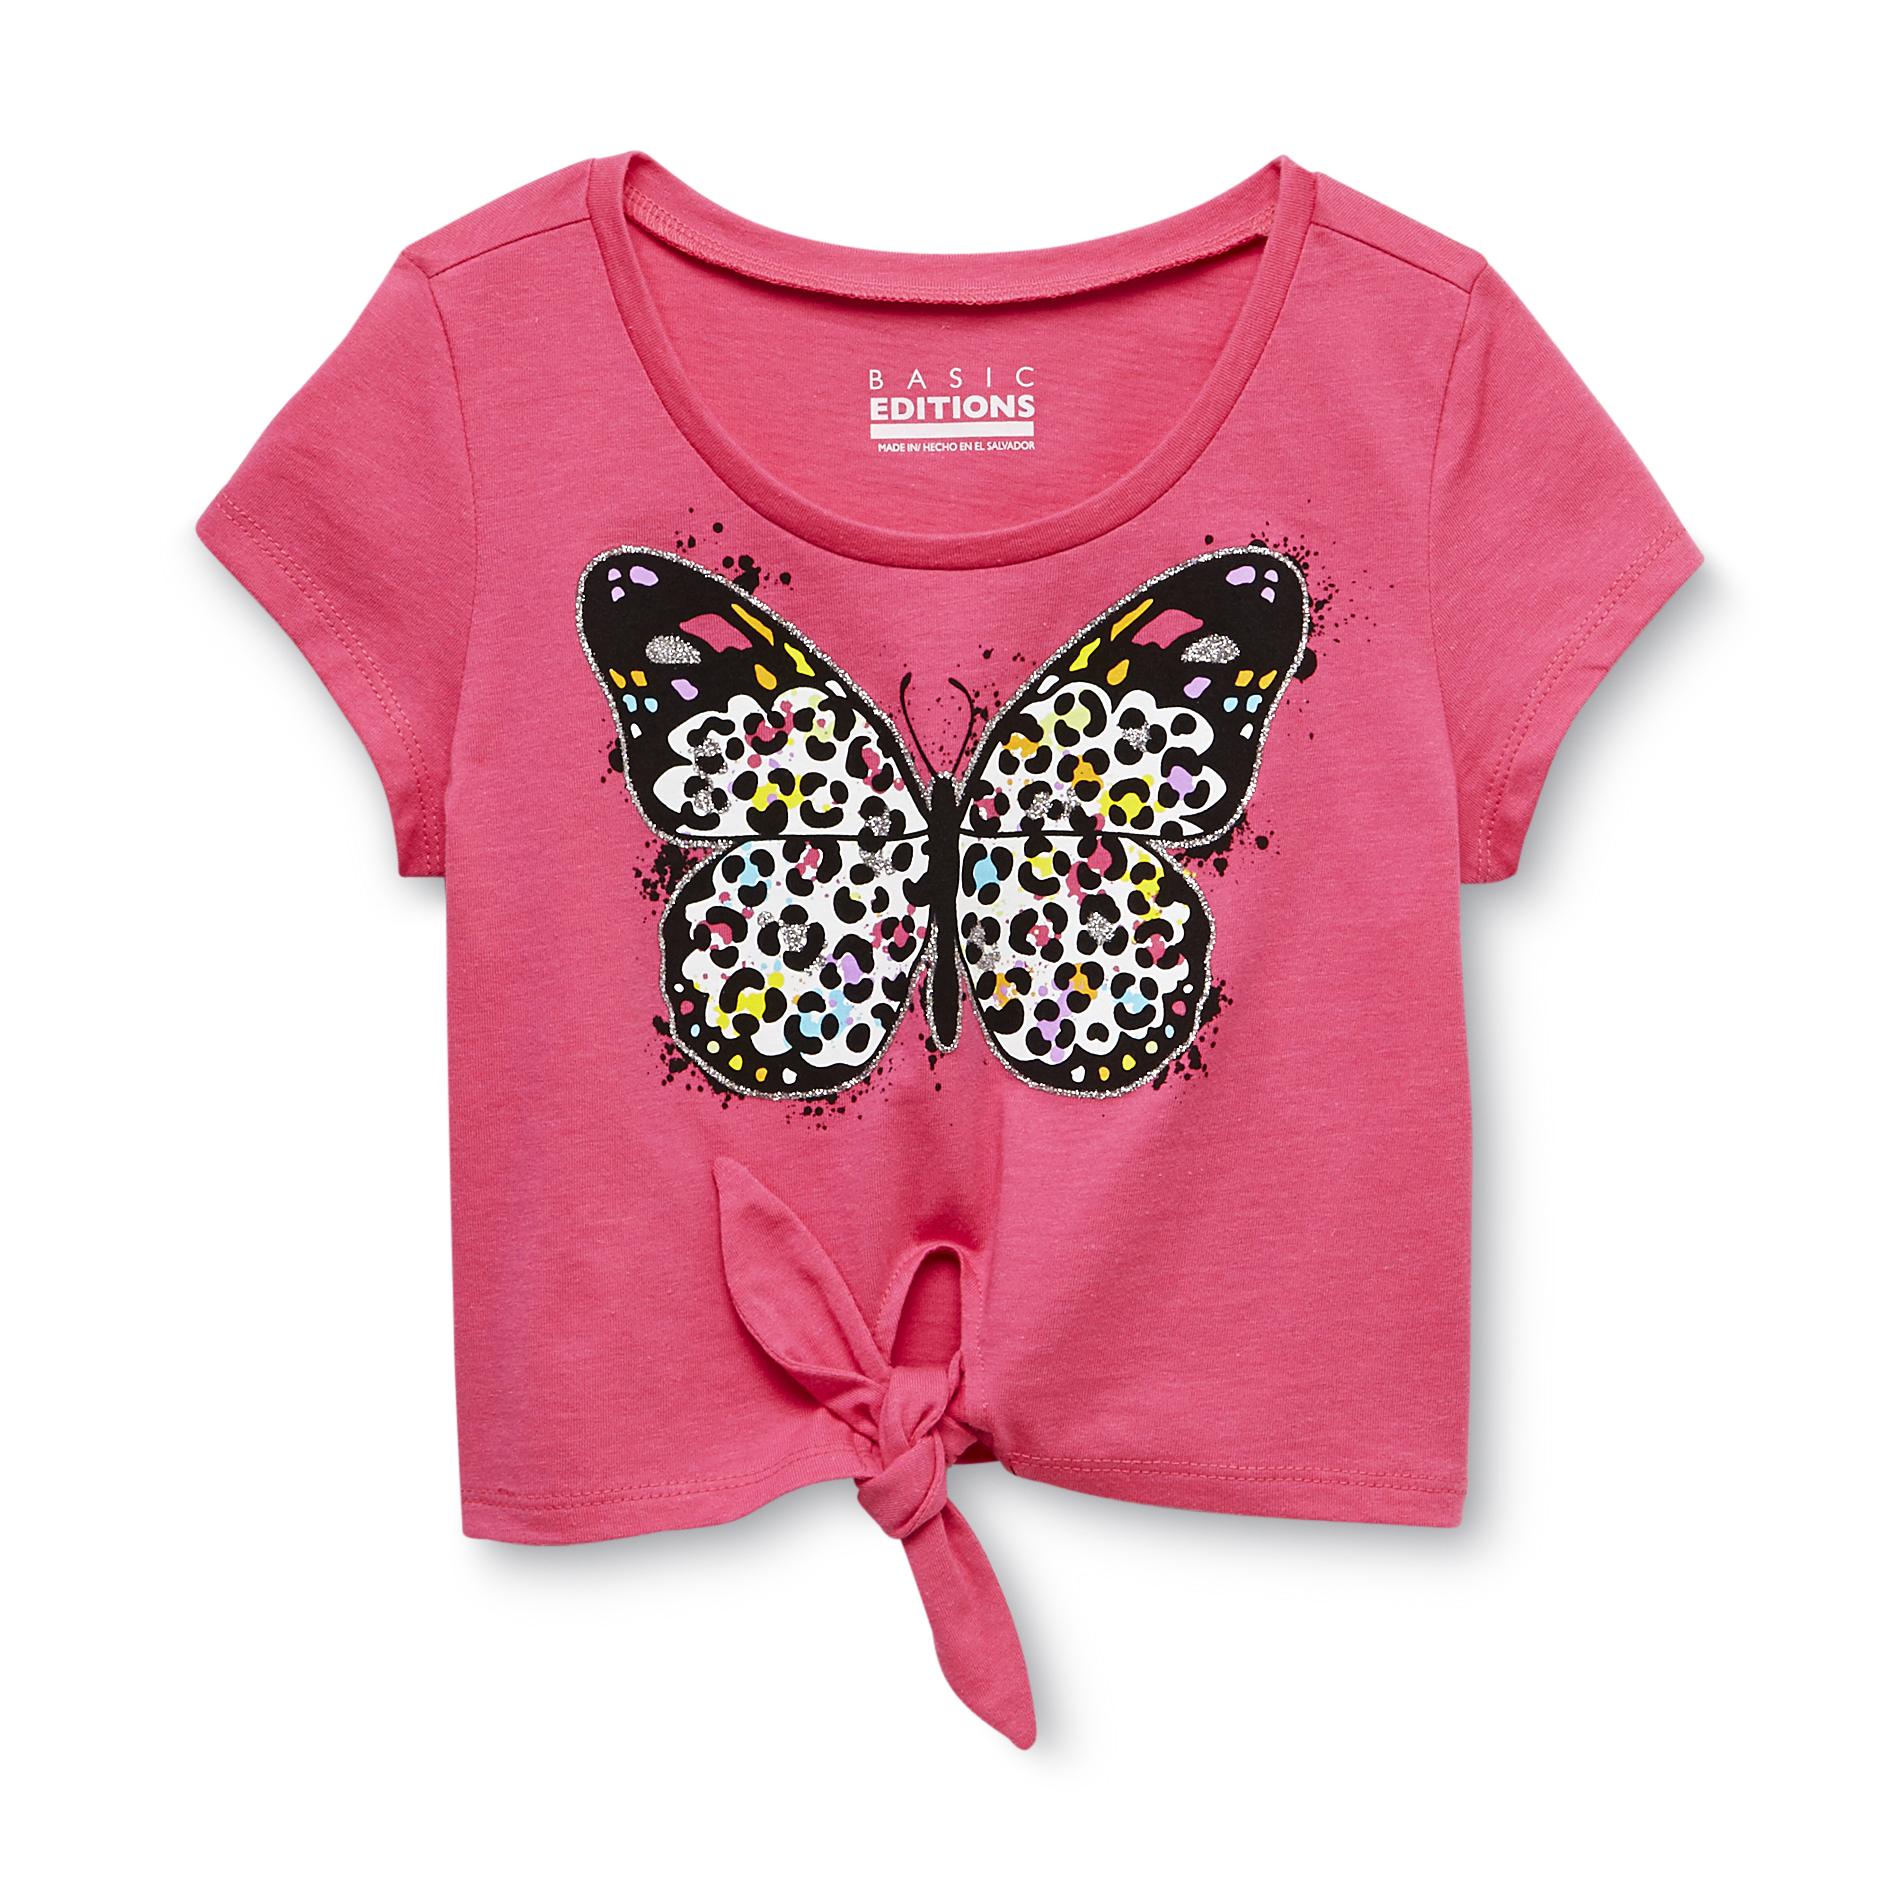 Basic Editions Girl's Tie-Front Crop Top - Butterfly & Glitter Print